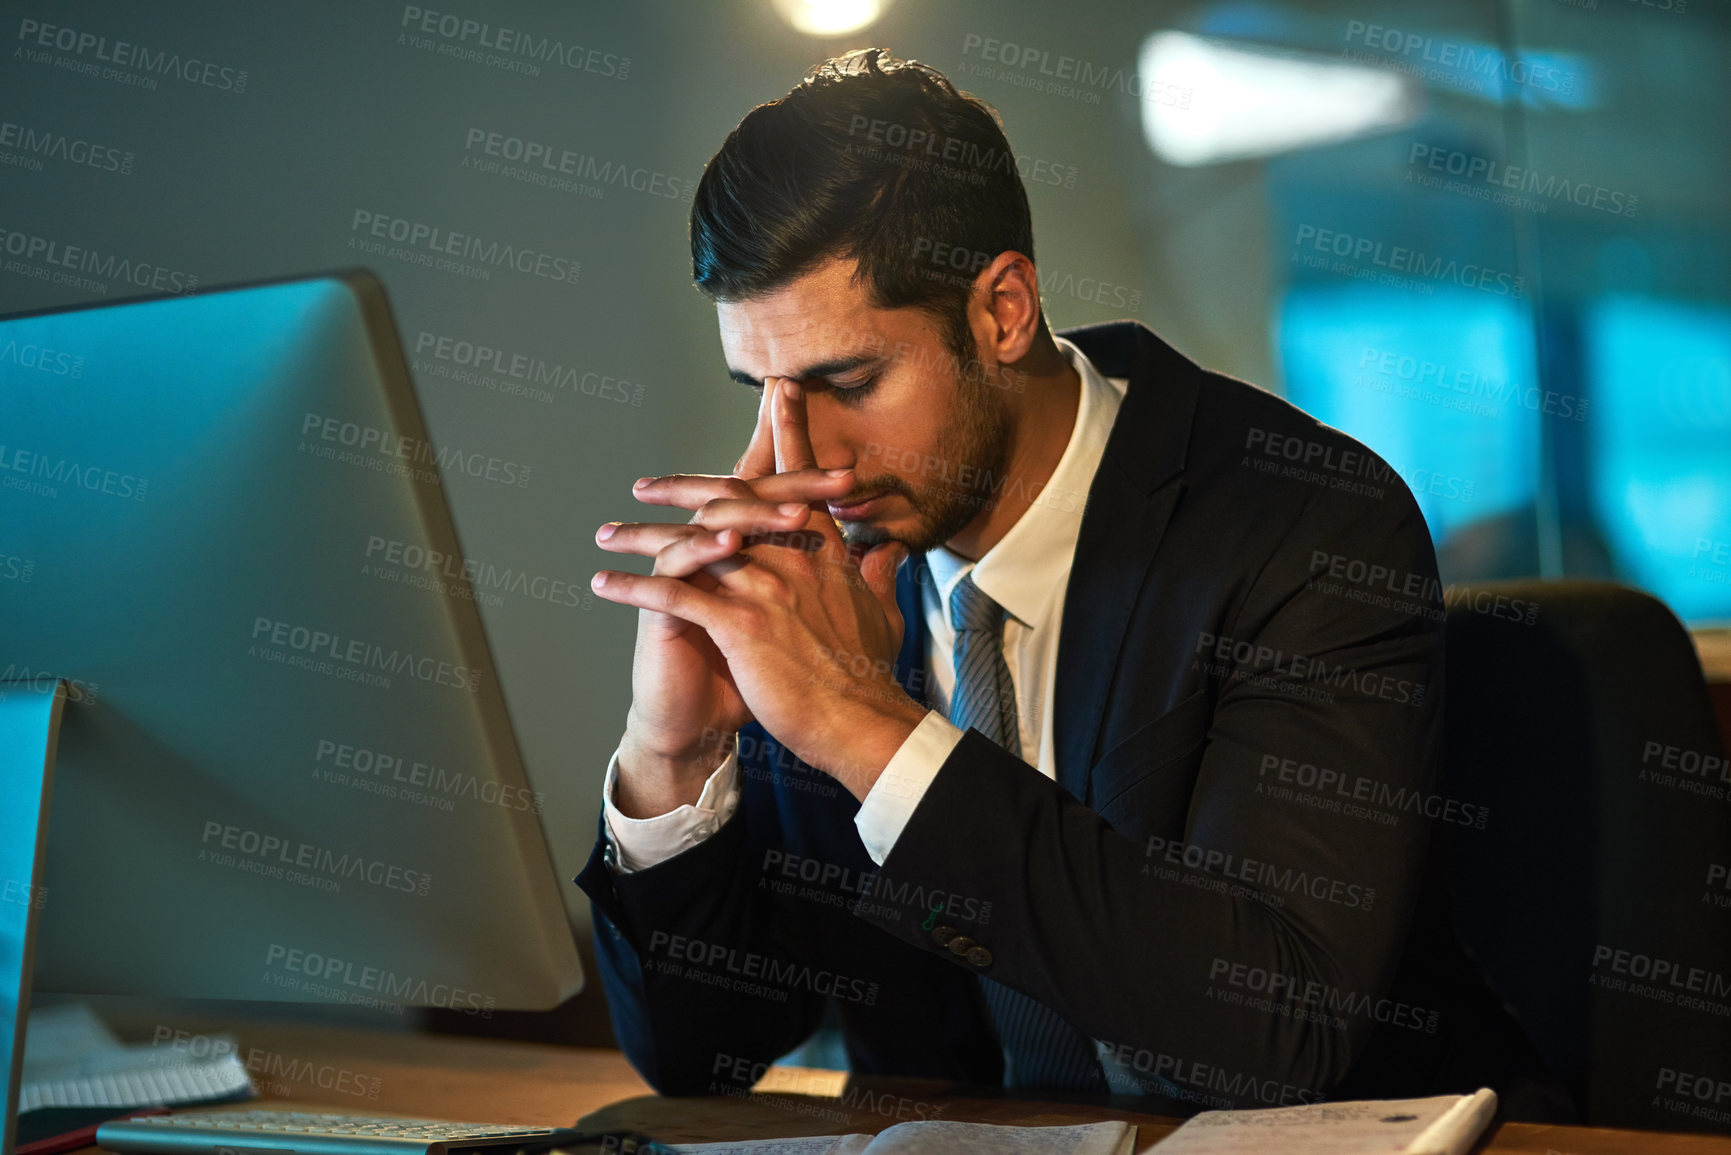 Buy stock photo Shot of a young businessman experiencing stress during a late night at work